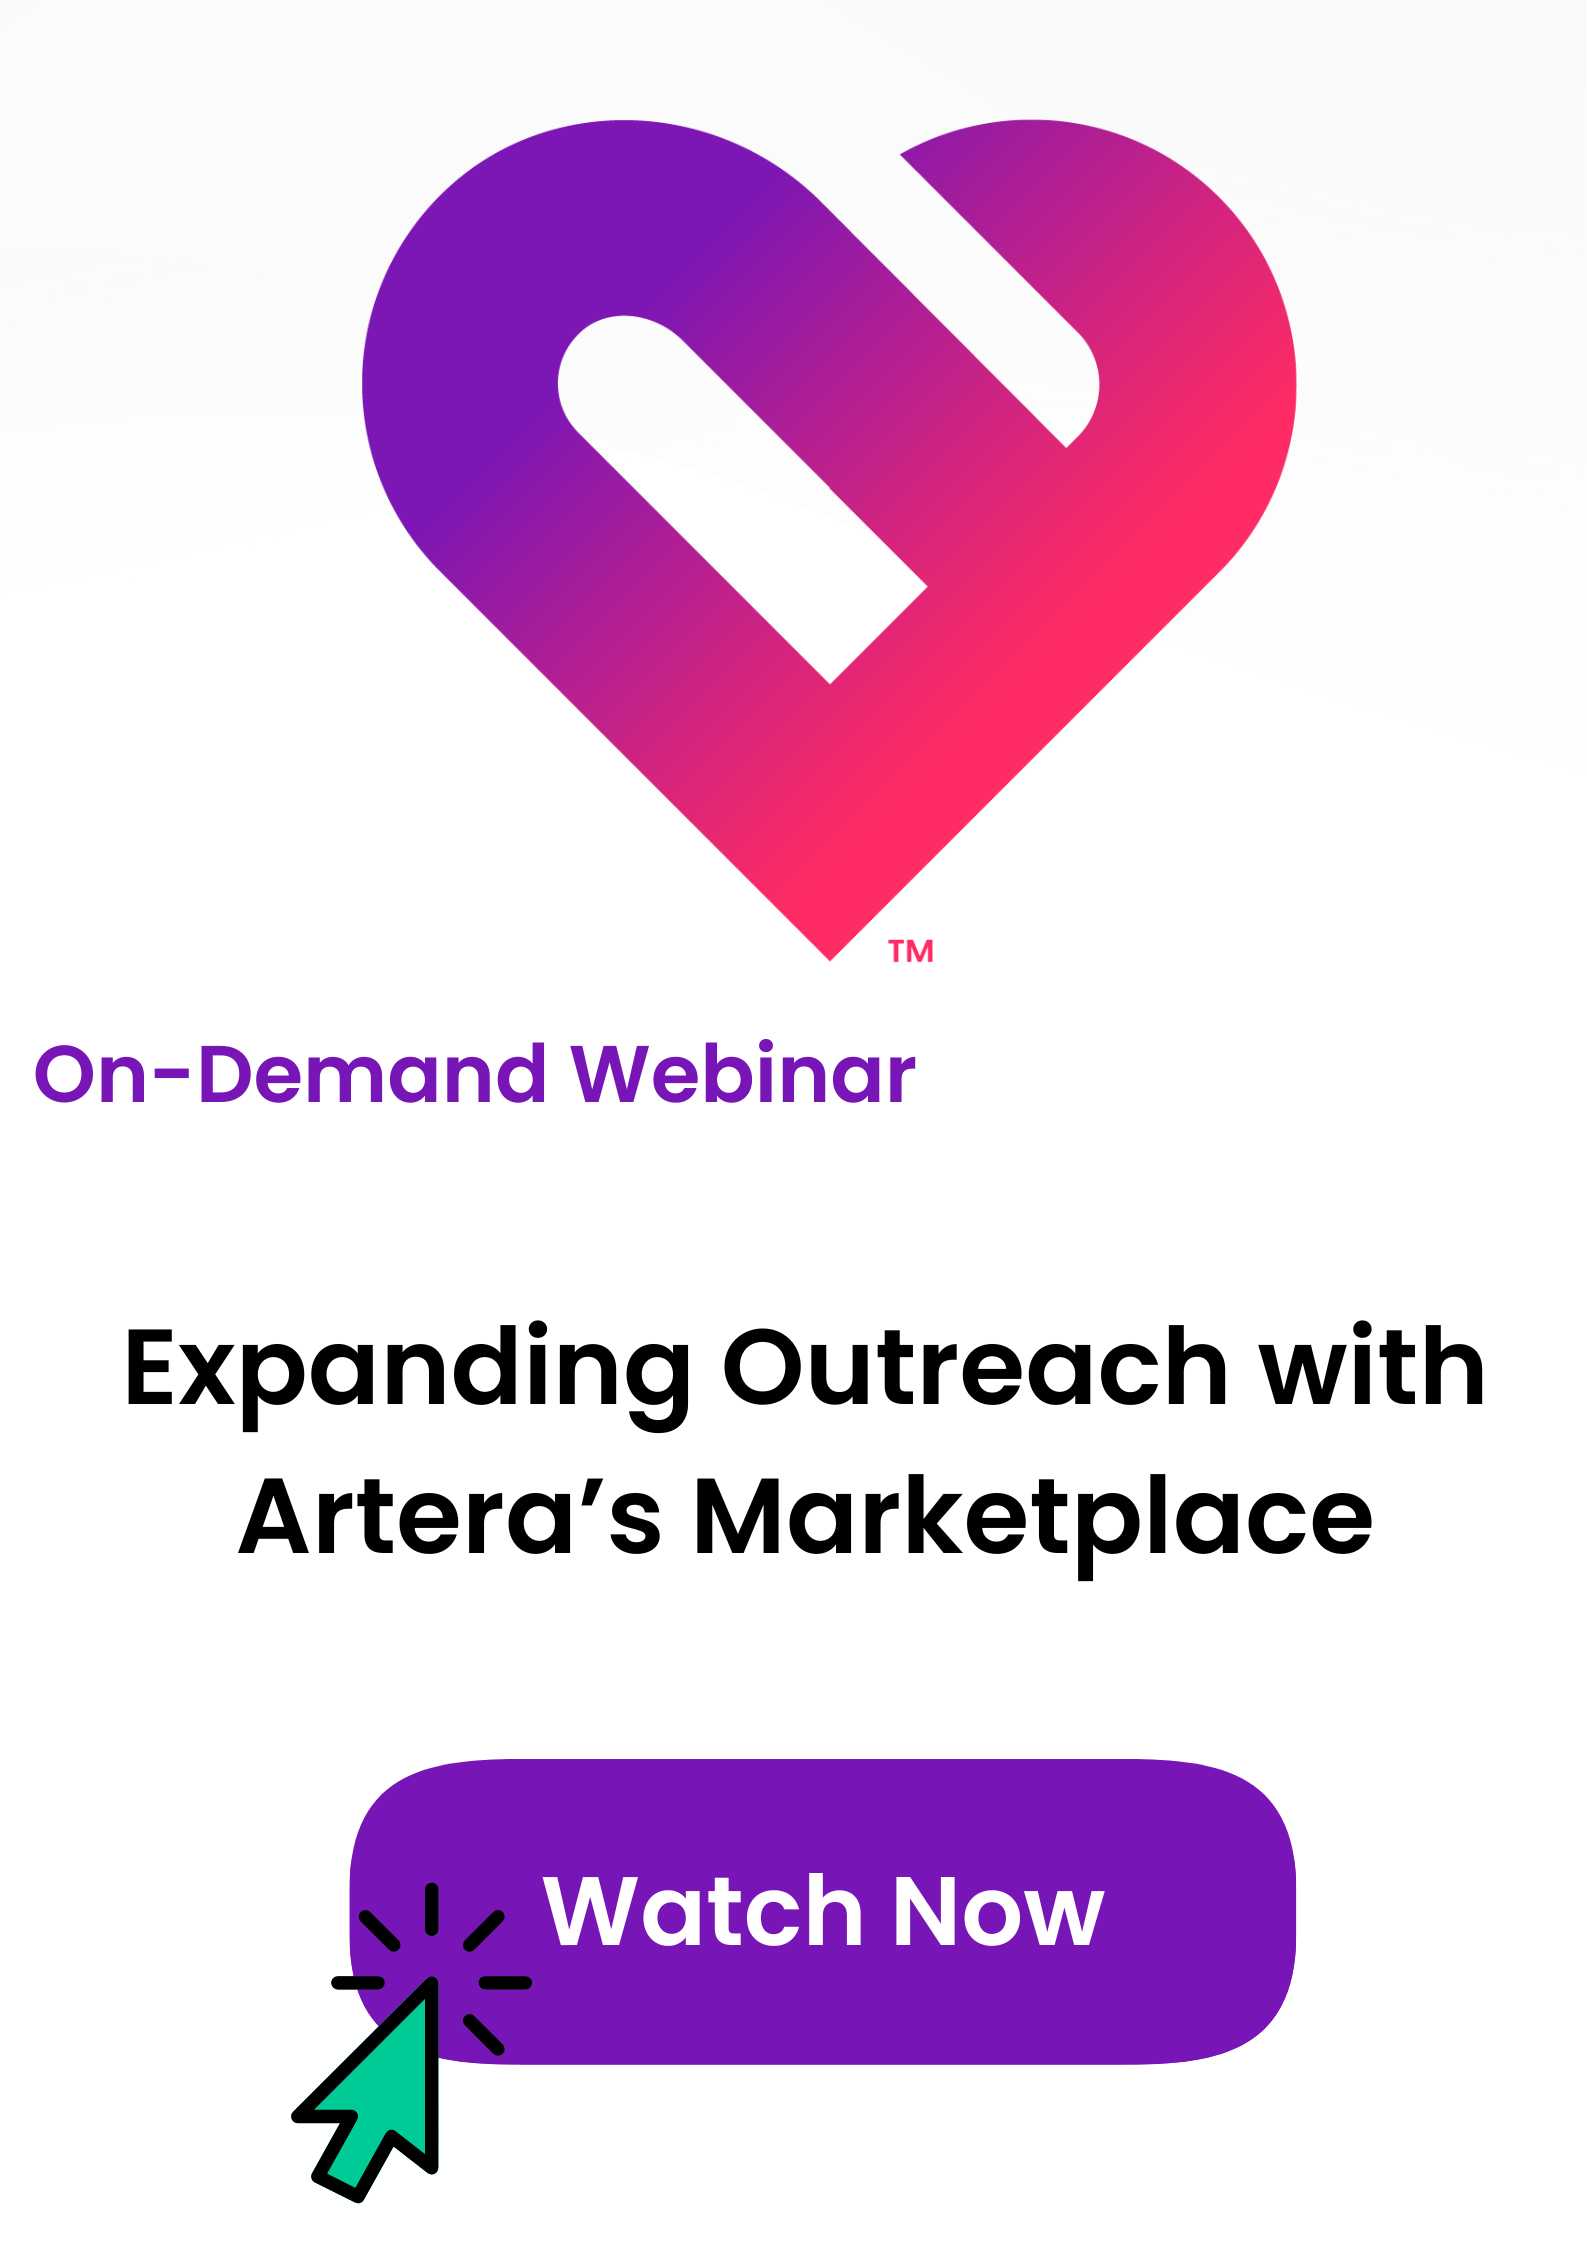 On-demand webinar tile for Marketplace Overview, click to watch now